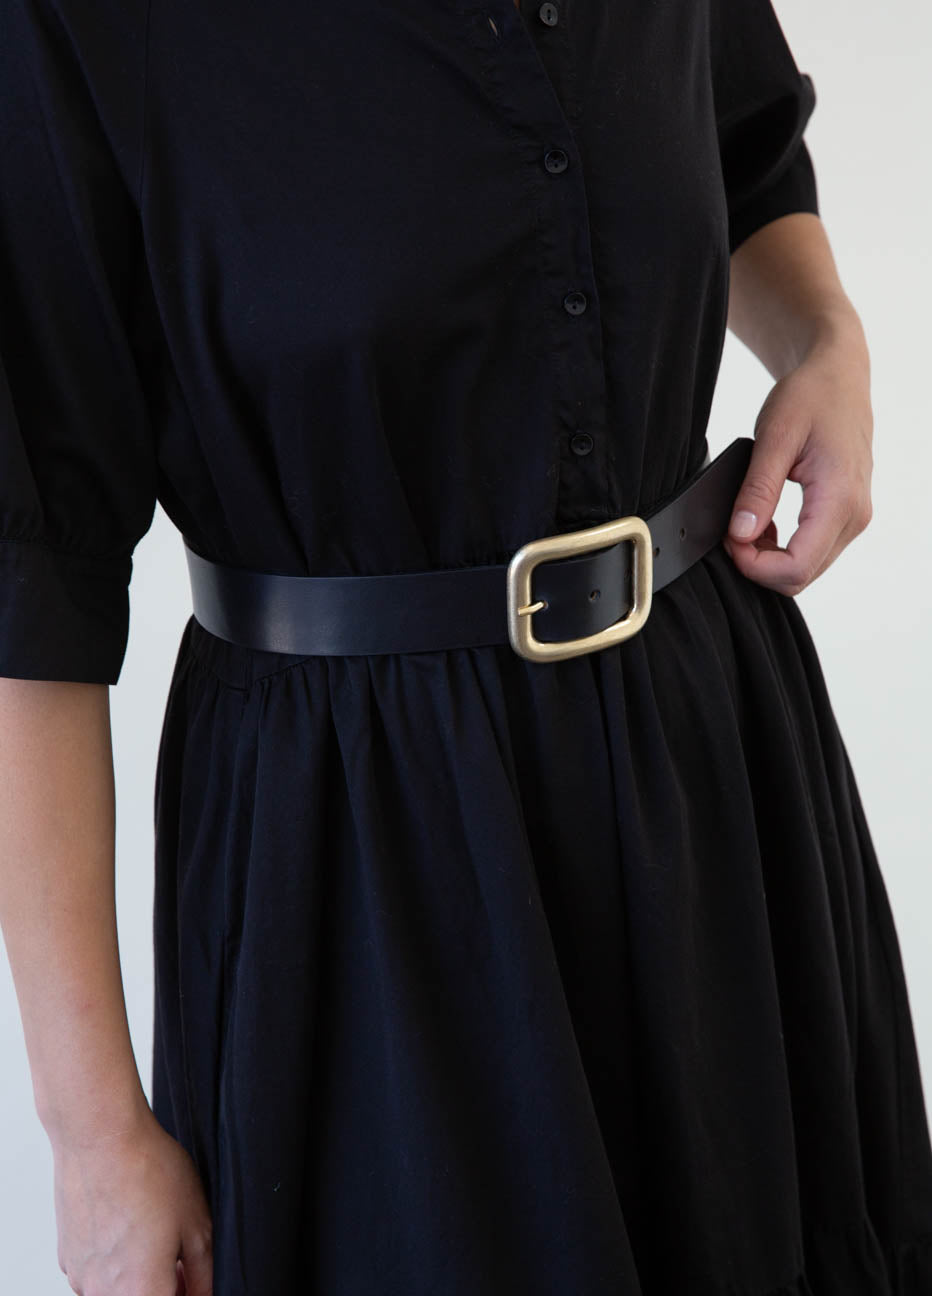 Black Leather and Brushed Brass Belt